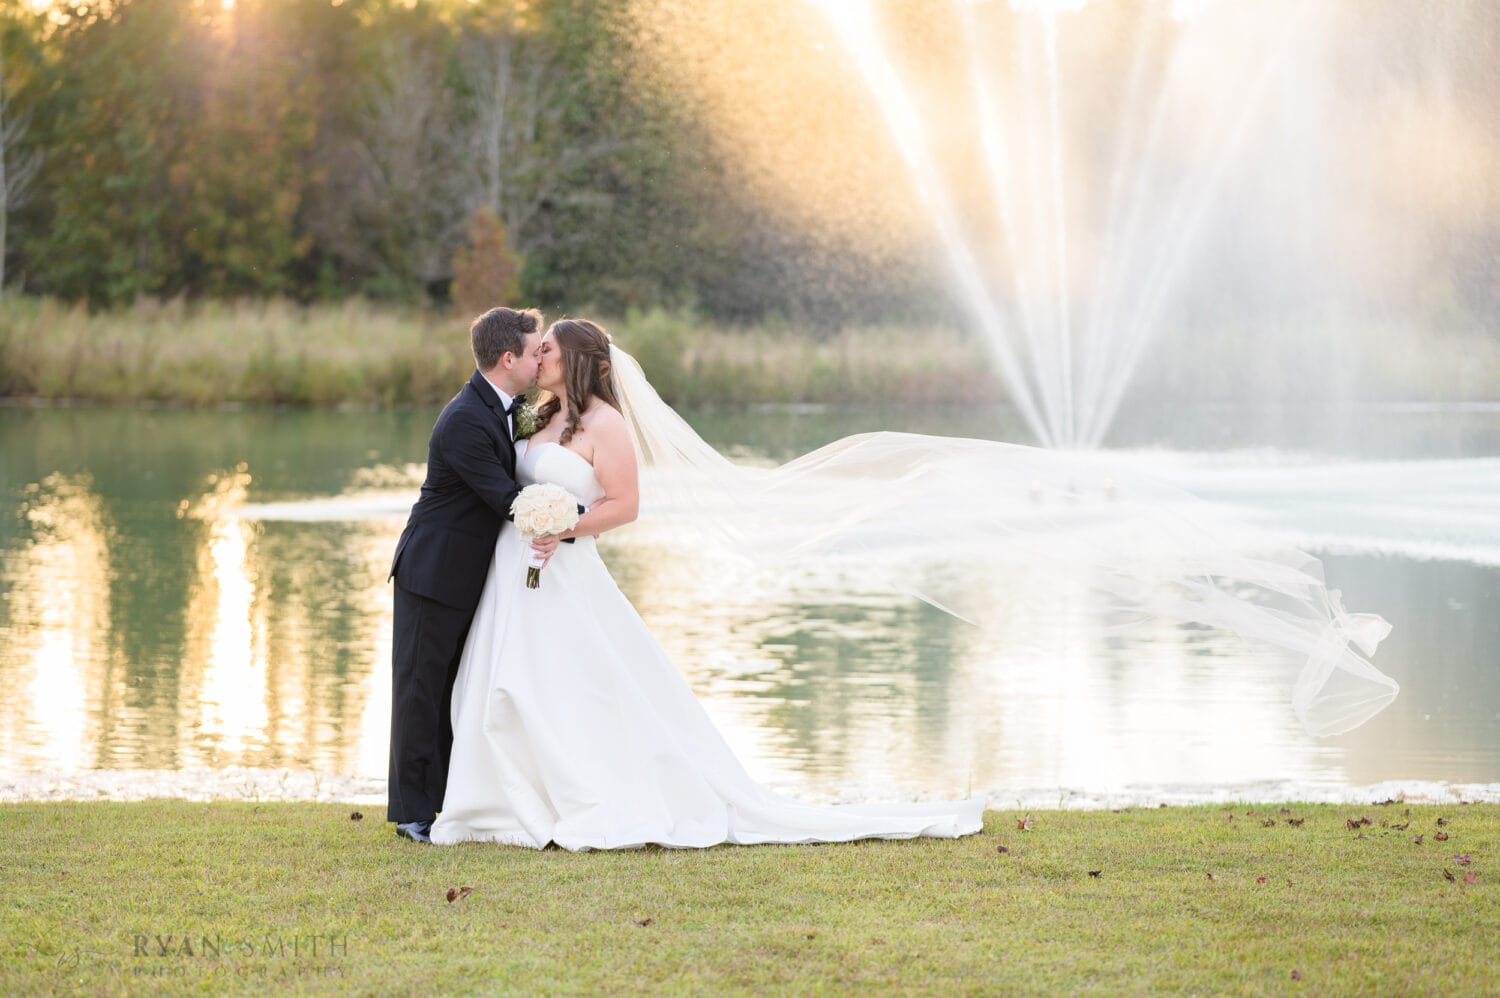 Throwing veil into the air for a kiss - The Venue at White Oaks Farm